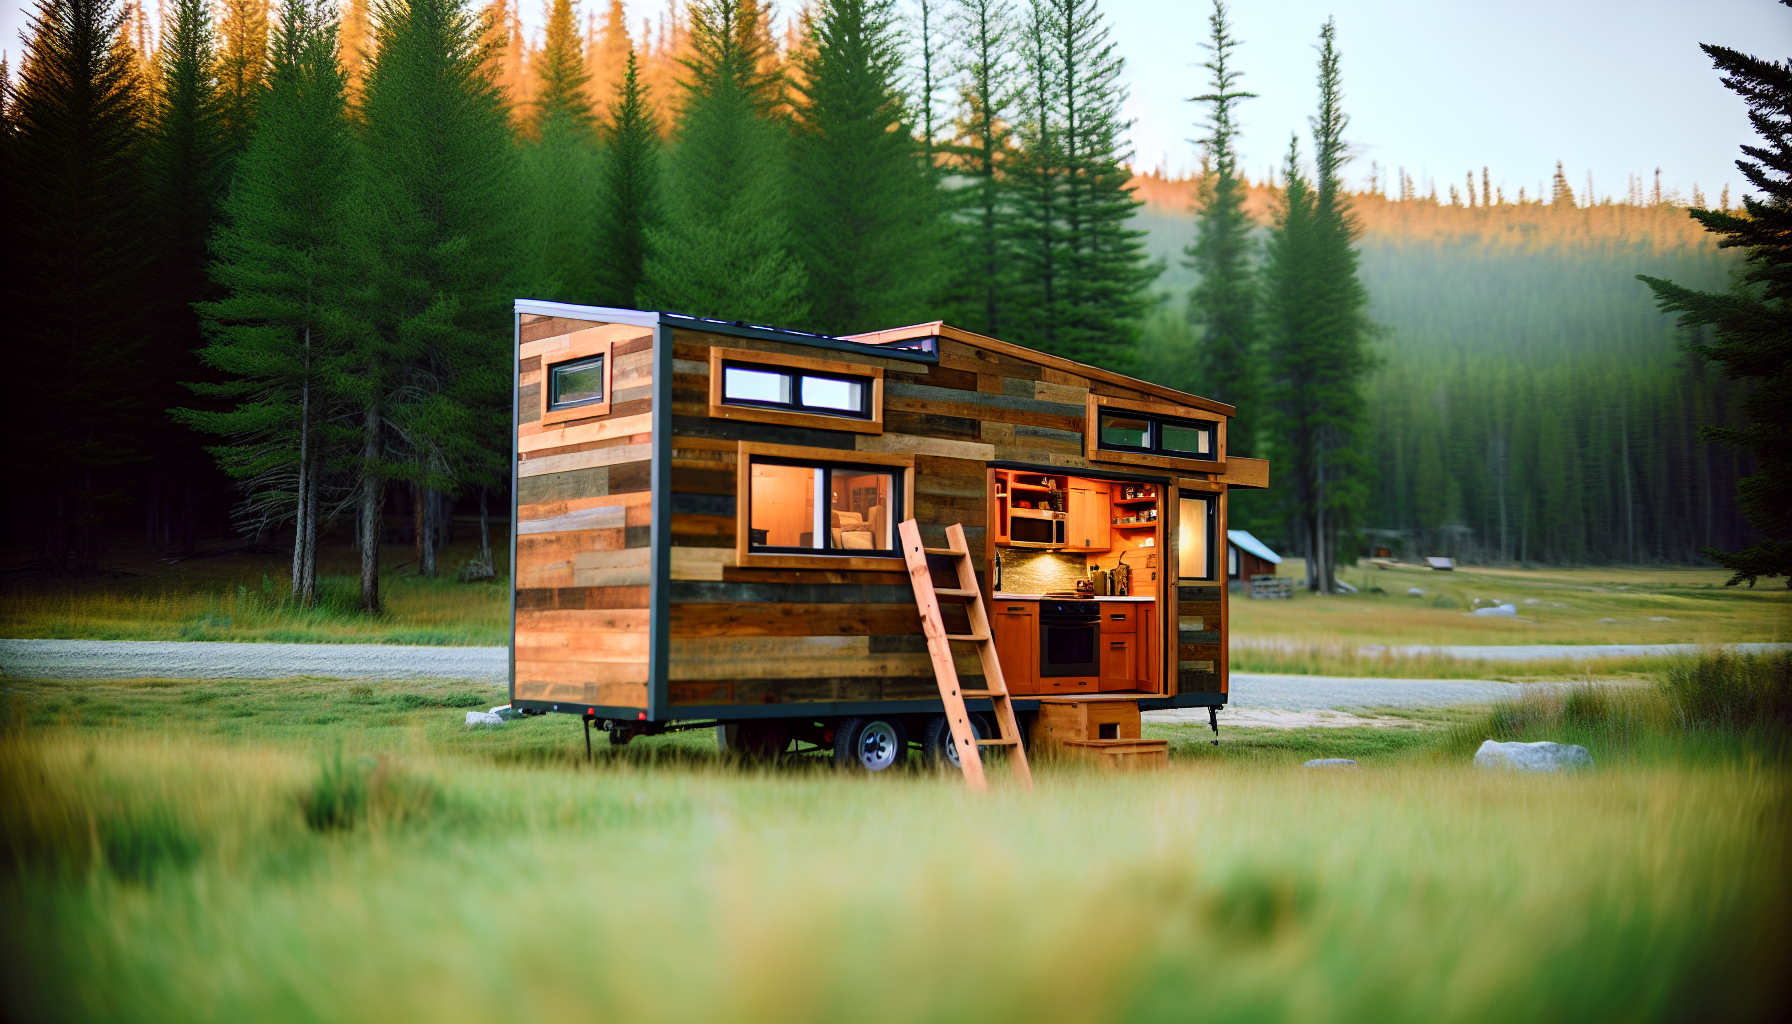 Mobile tiny house with a versatile floor plan and lofted sleeping area